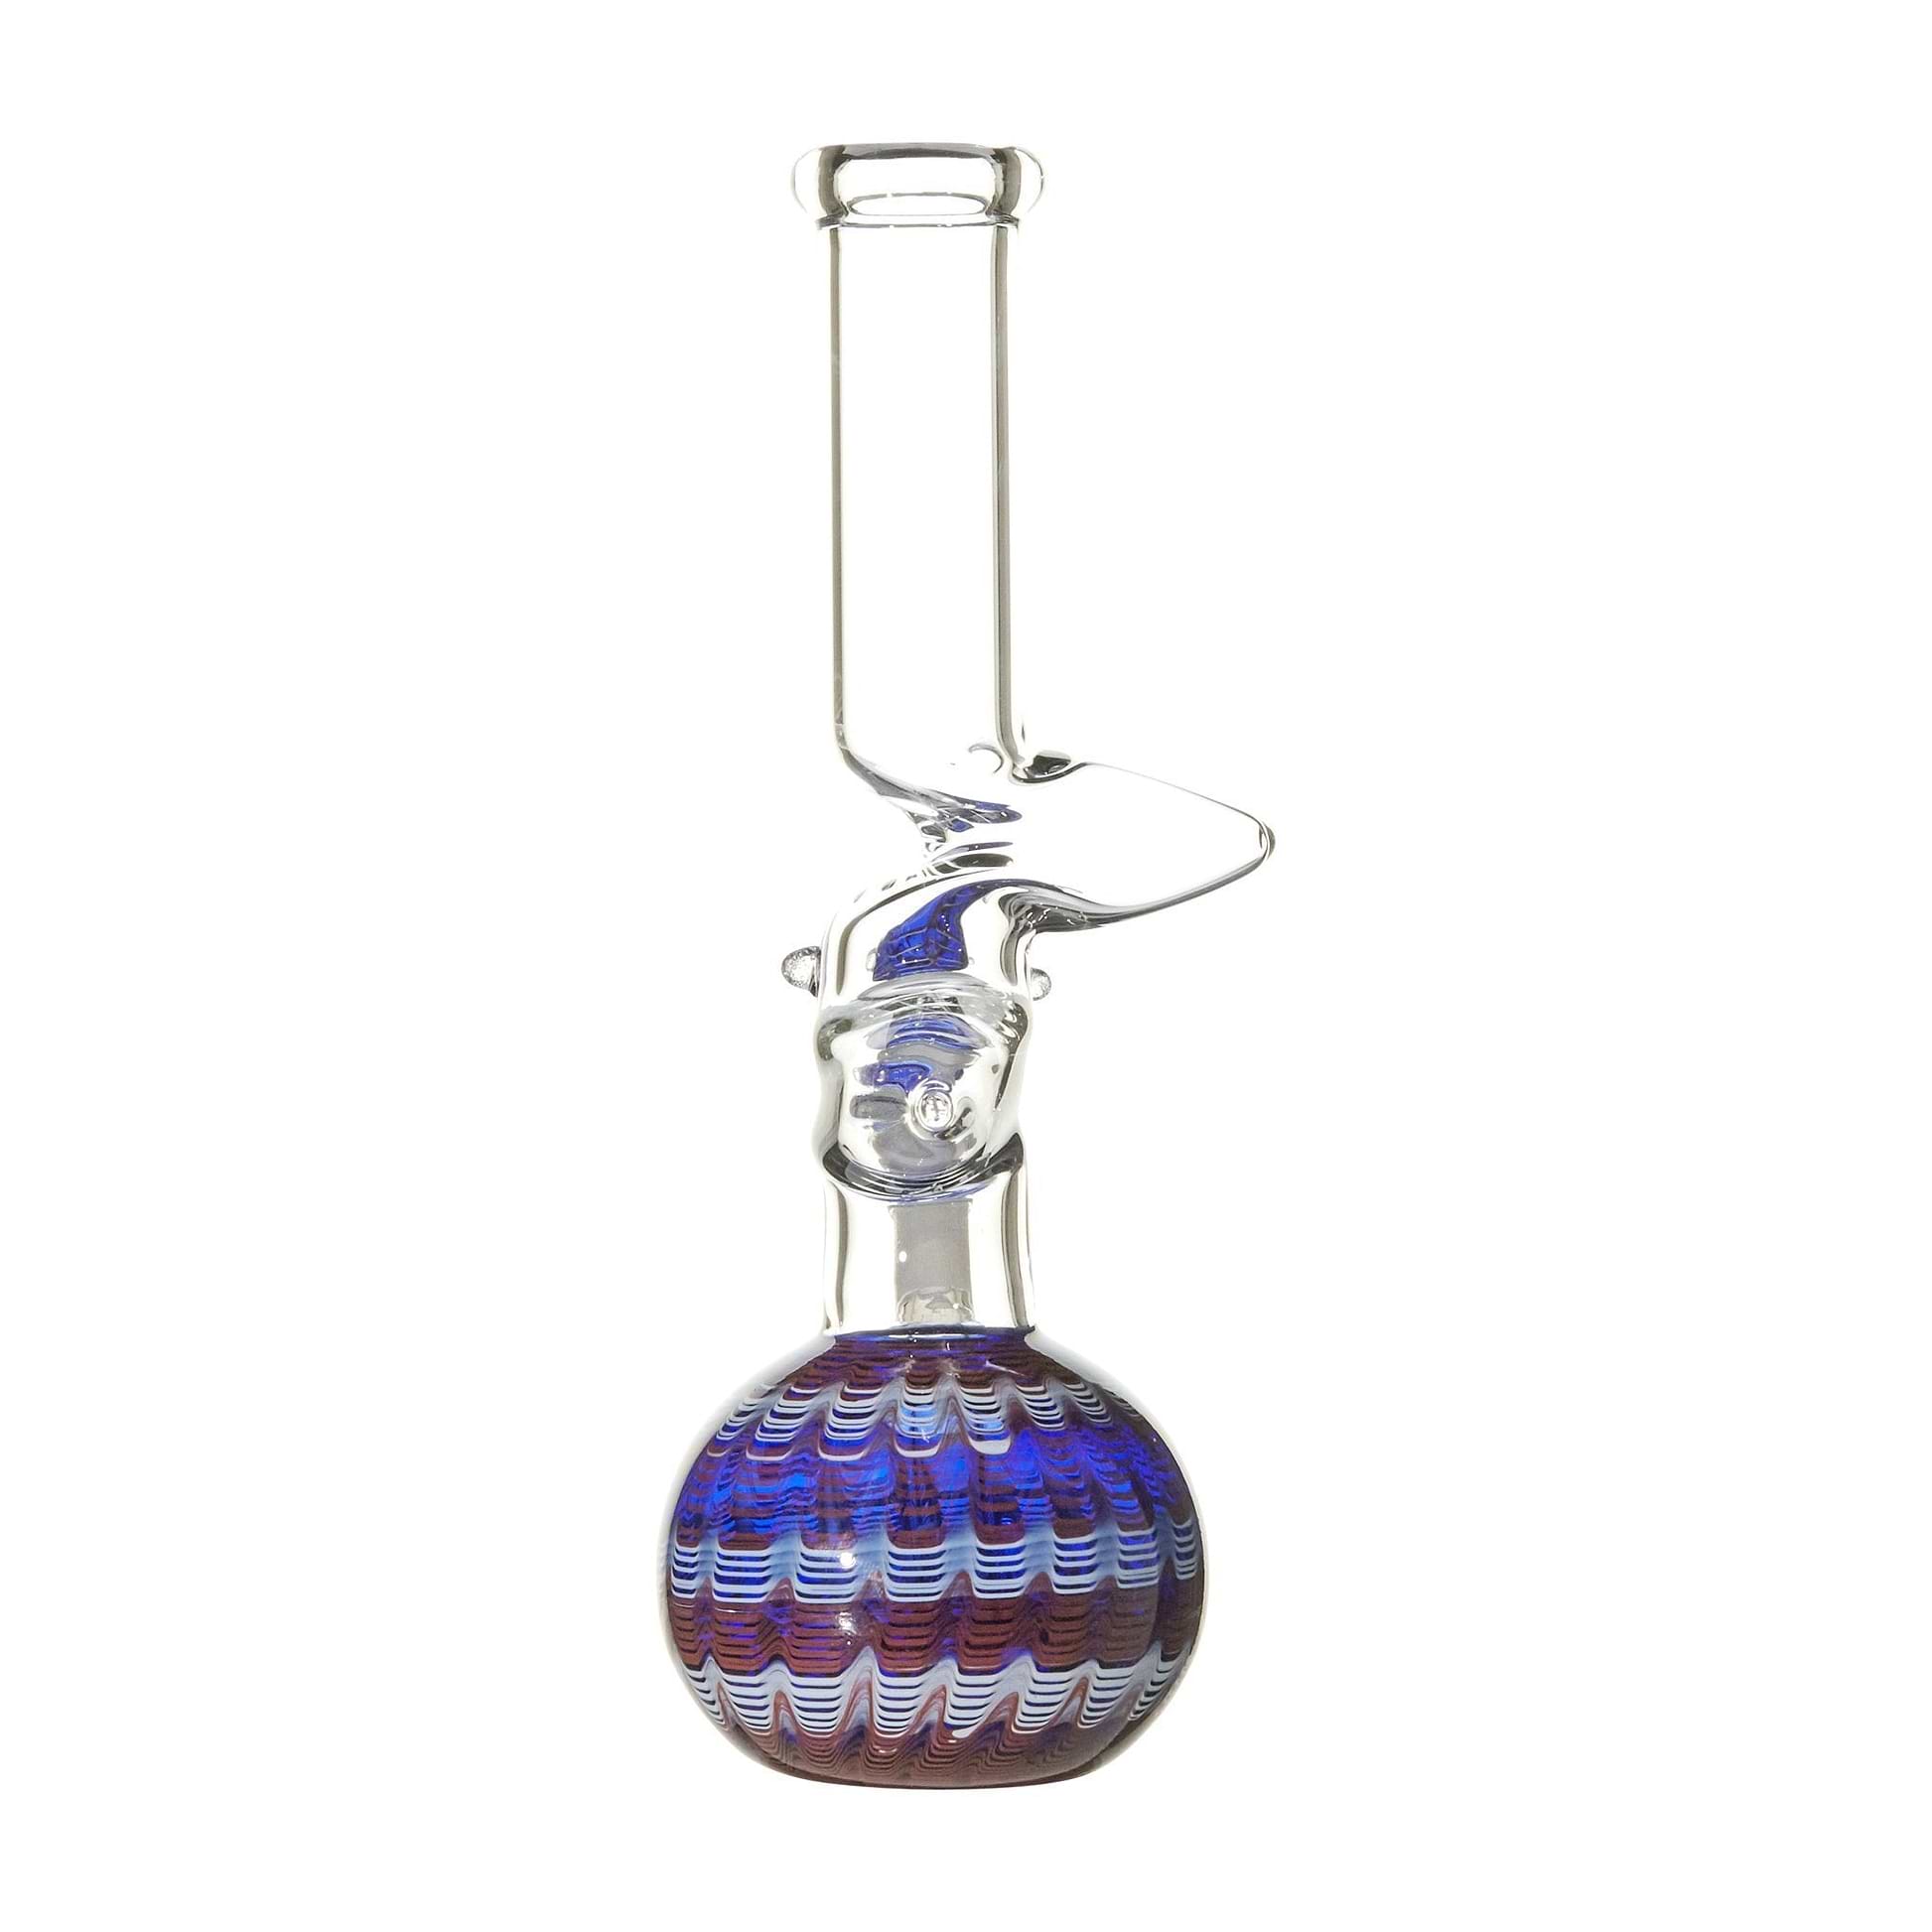 10-inch zong-style glass bong smoking device with kinky shape psychedelic design protruding Z shape